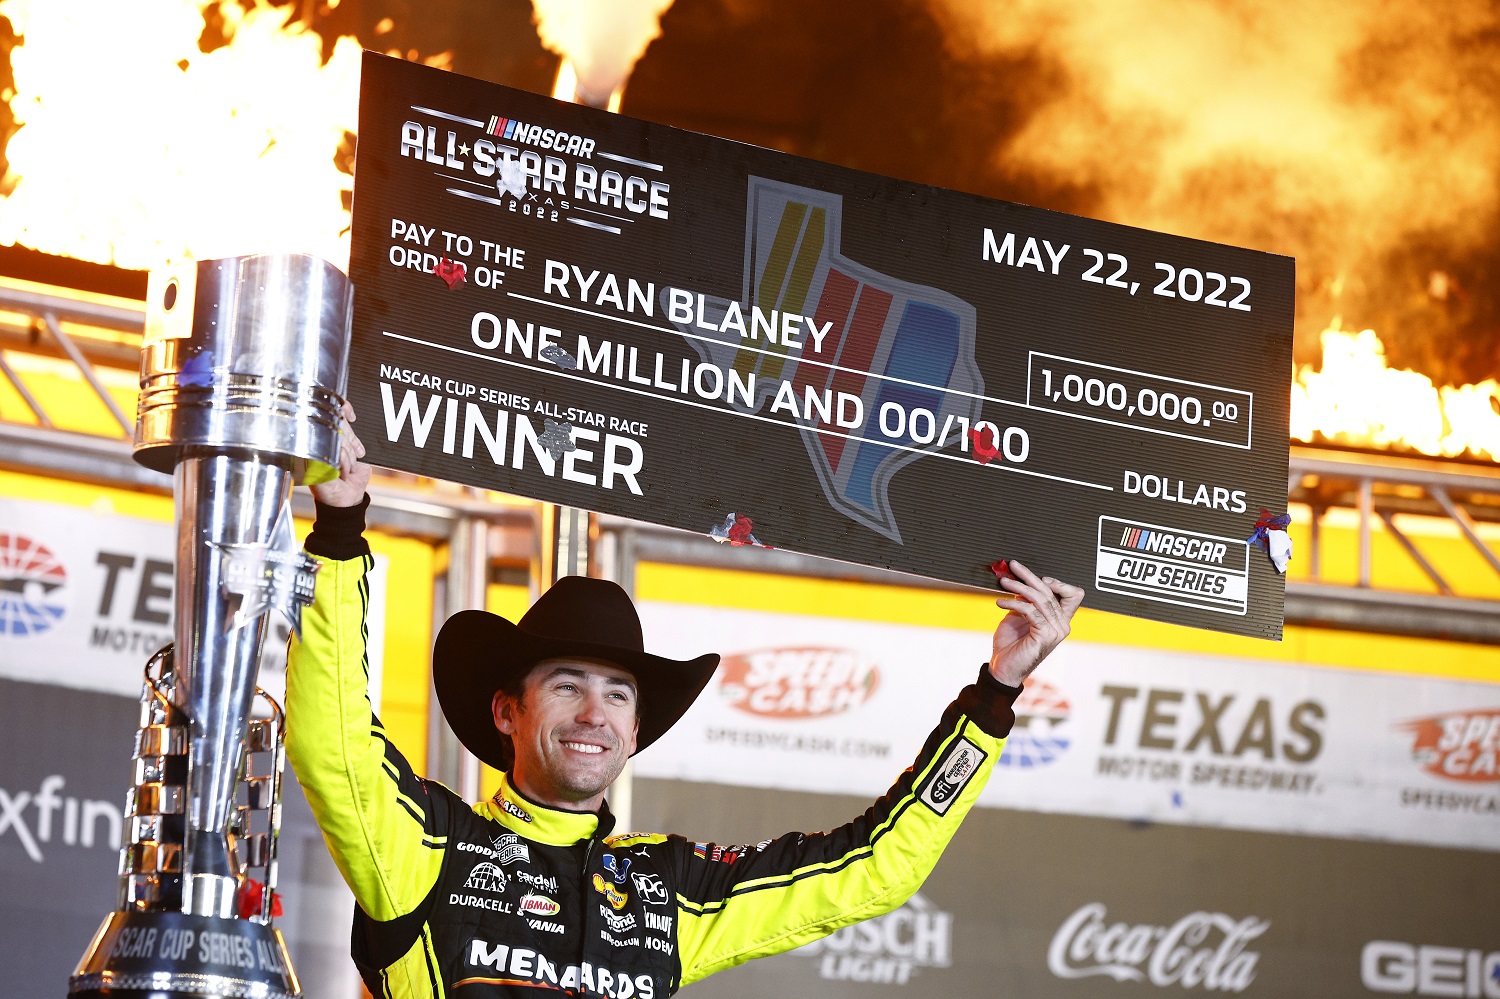 Ryan Blaney in Victory Lane after winning the NASCAR Cup Series All-Star Race at Texas Motor Speedway on May 22, 2022. | Jared C. Tilton/Getty Images